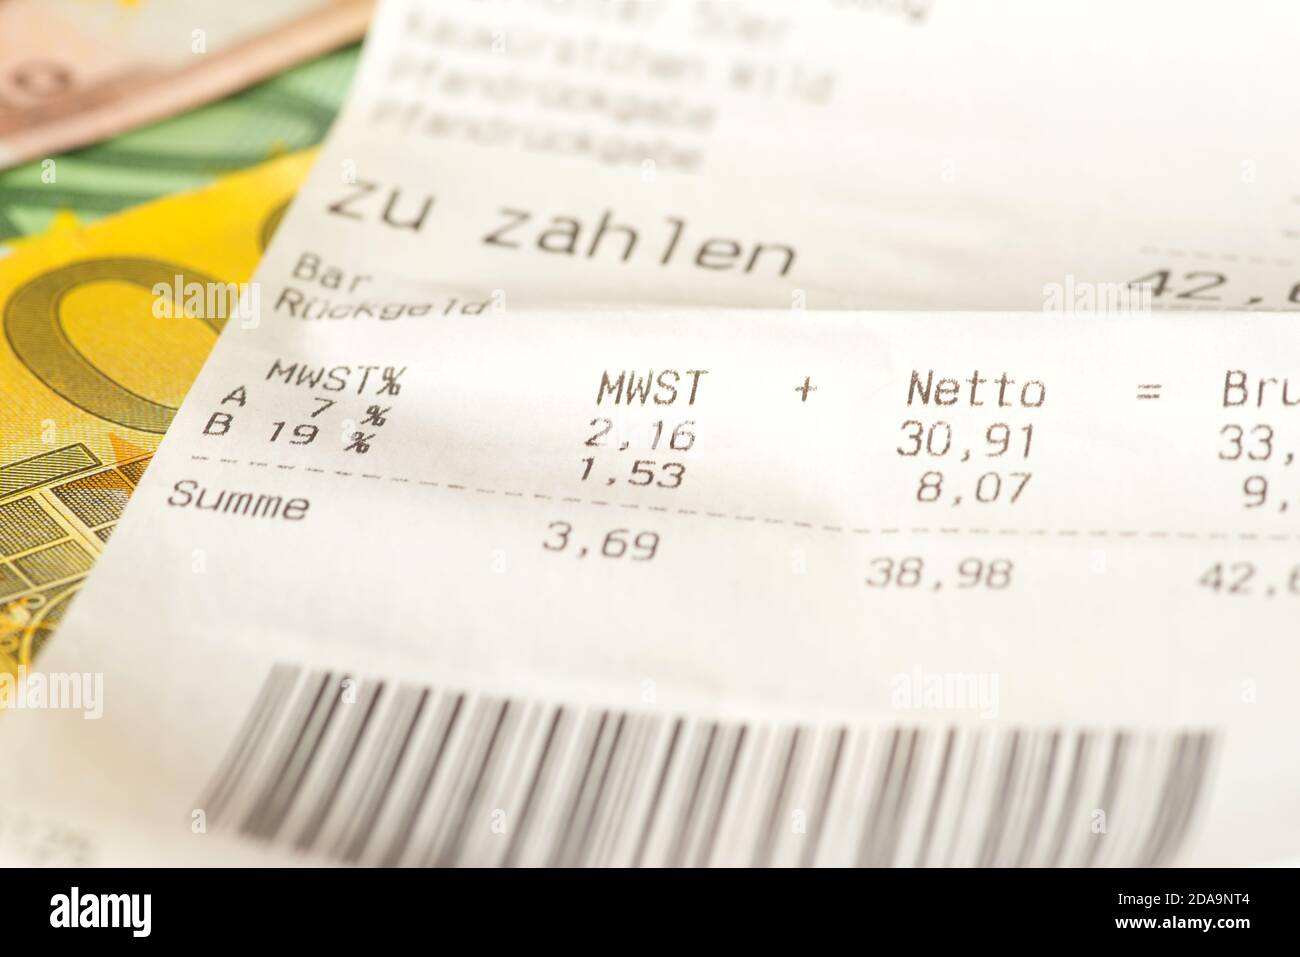 A receipt and euro bills Stock Photo